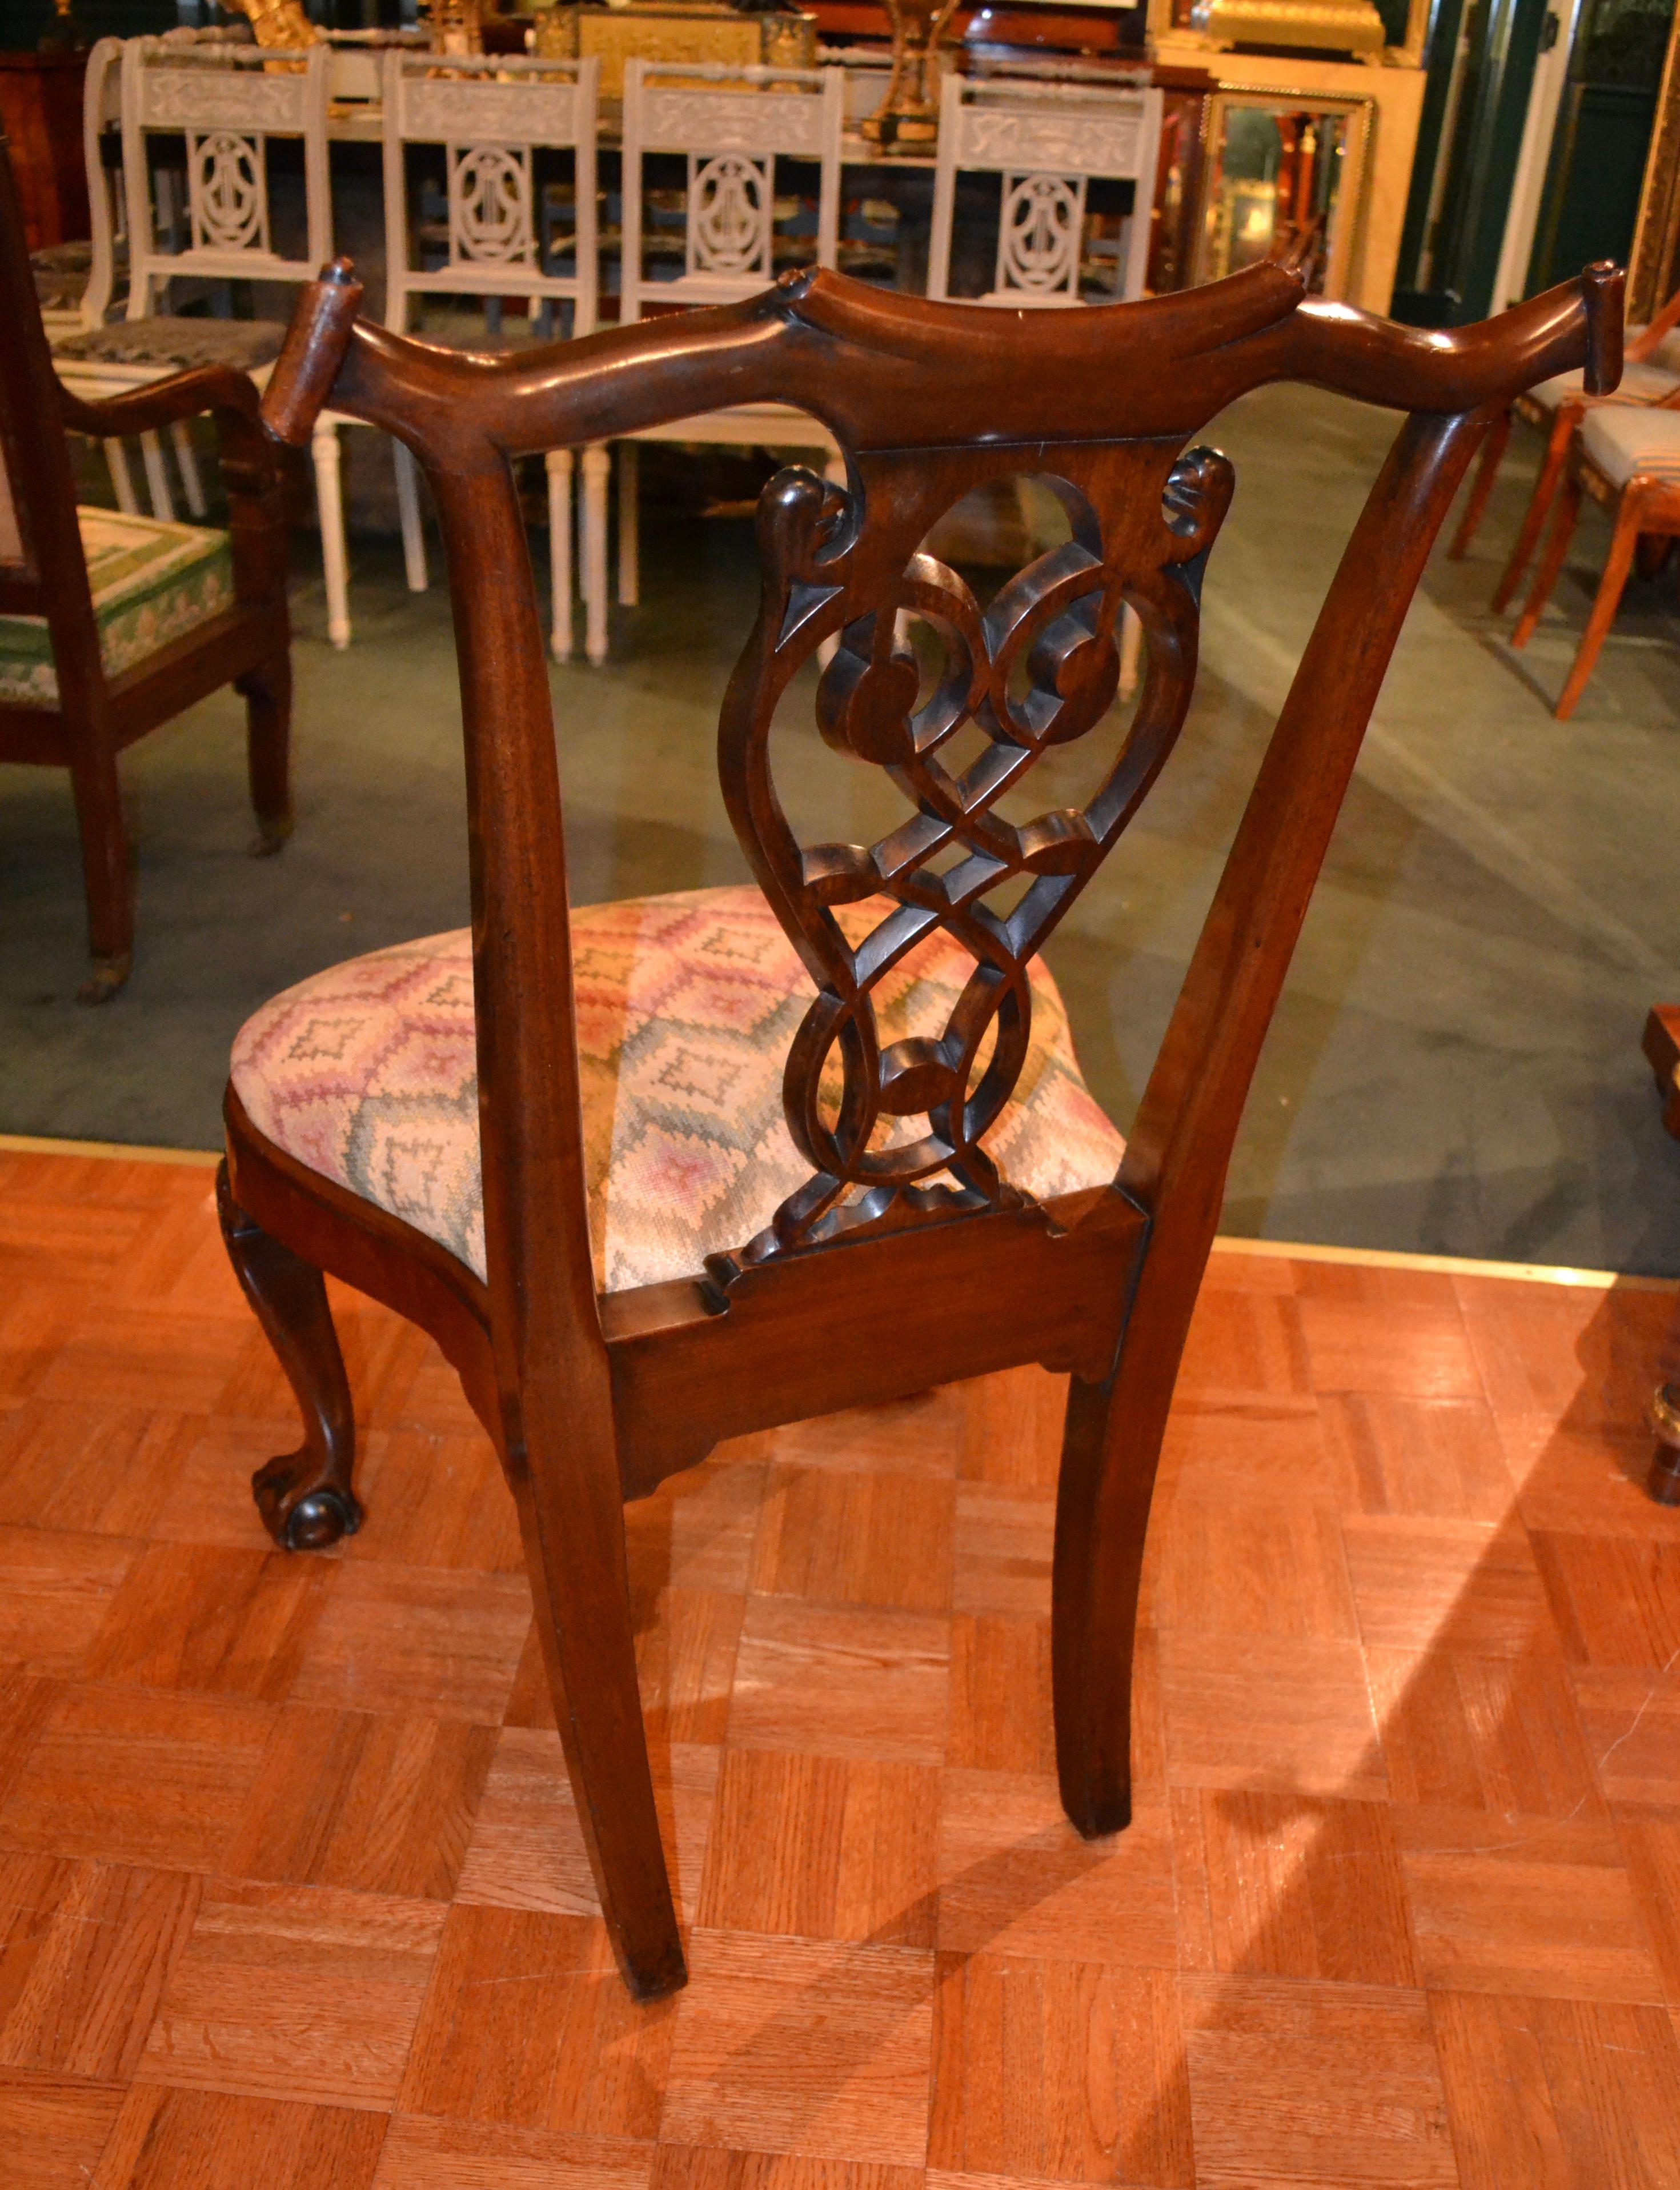 19th Century American Carved Open Armchair In Good Condition For Sale In Vancouver, British Columbia